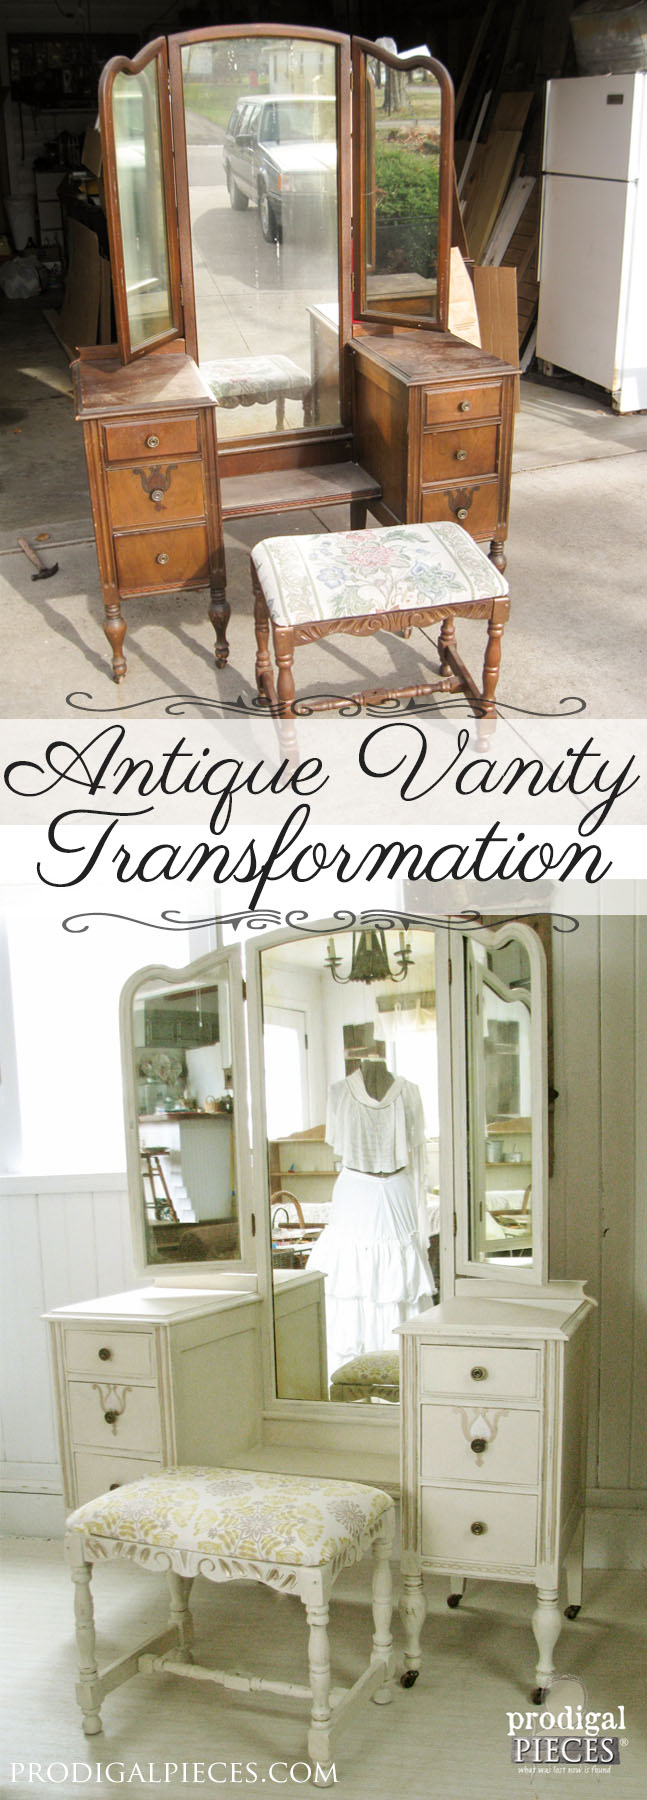 An Antique Vanity Transformation by Prodigal Pieces | prodigalpieces.com #prodigalpieces